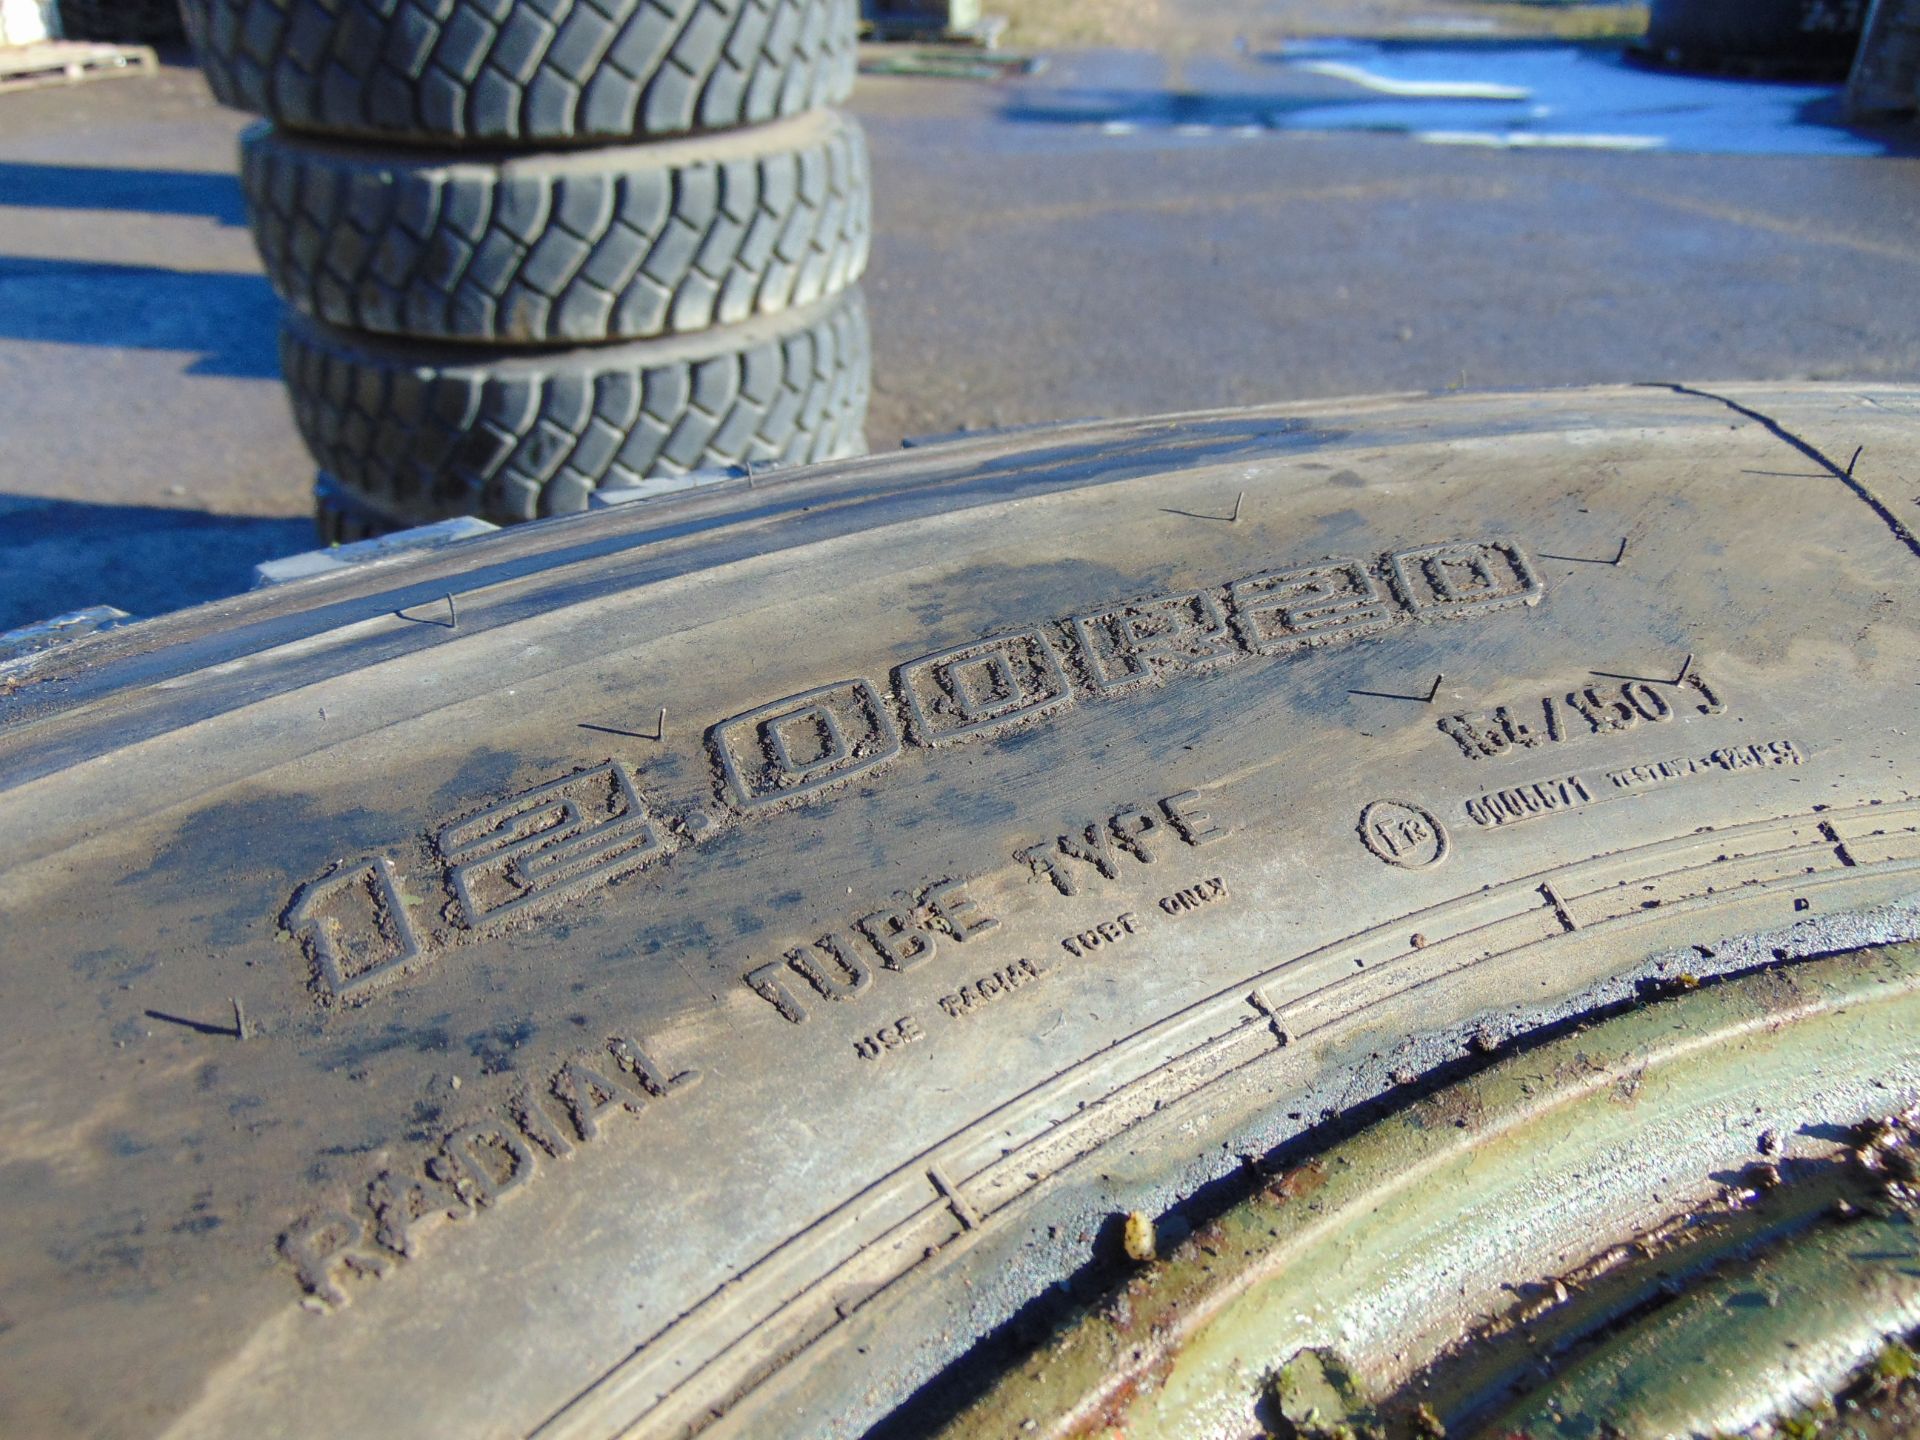 Qty 4 x Goodyear 12.00R20 G388 Unisteel tyres, unused still with bobbles fitted on 8 stud rims - Image 8 of 8